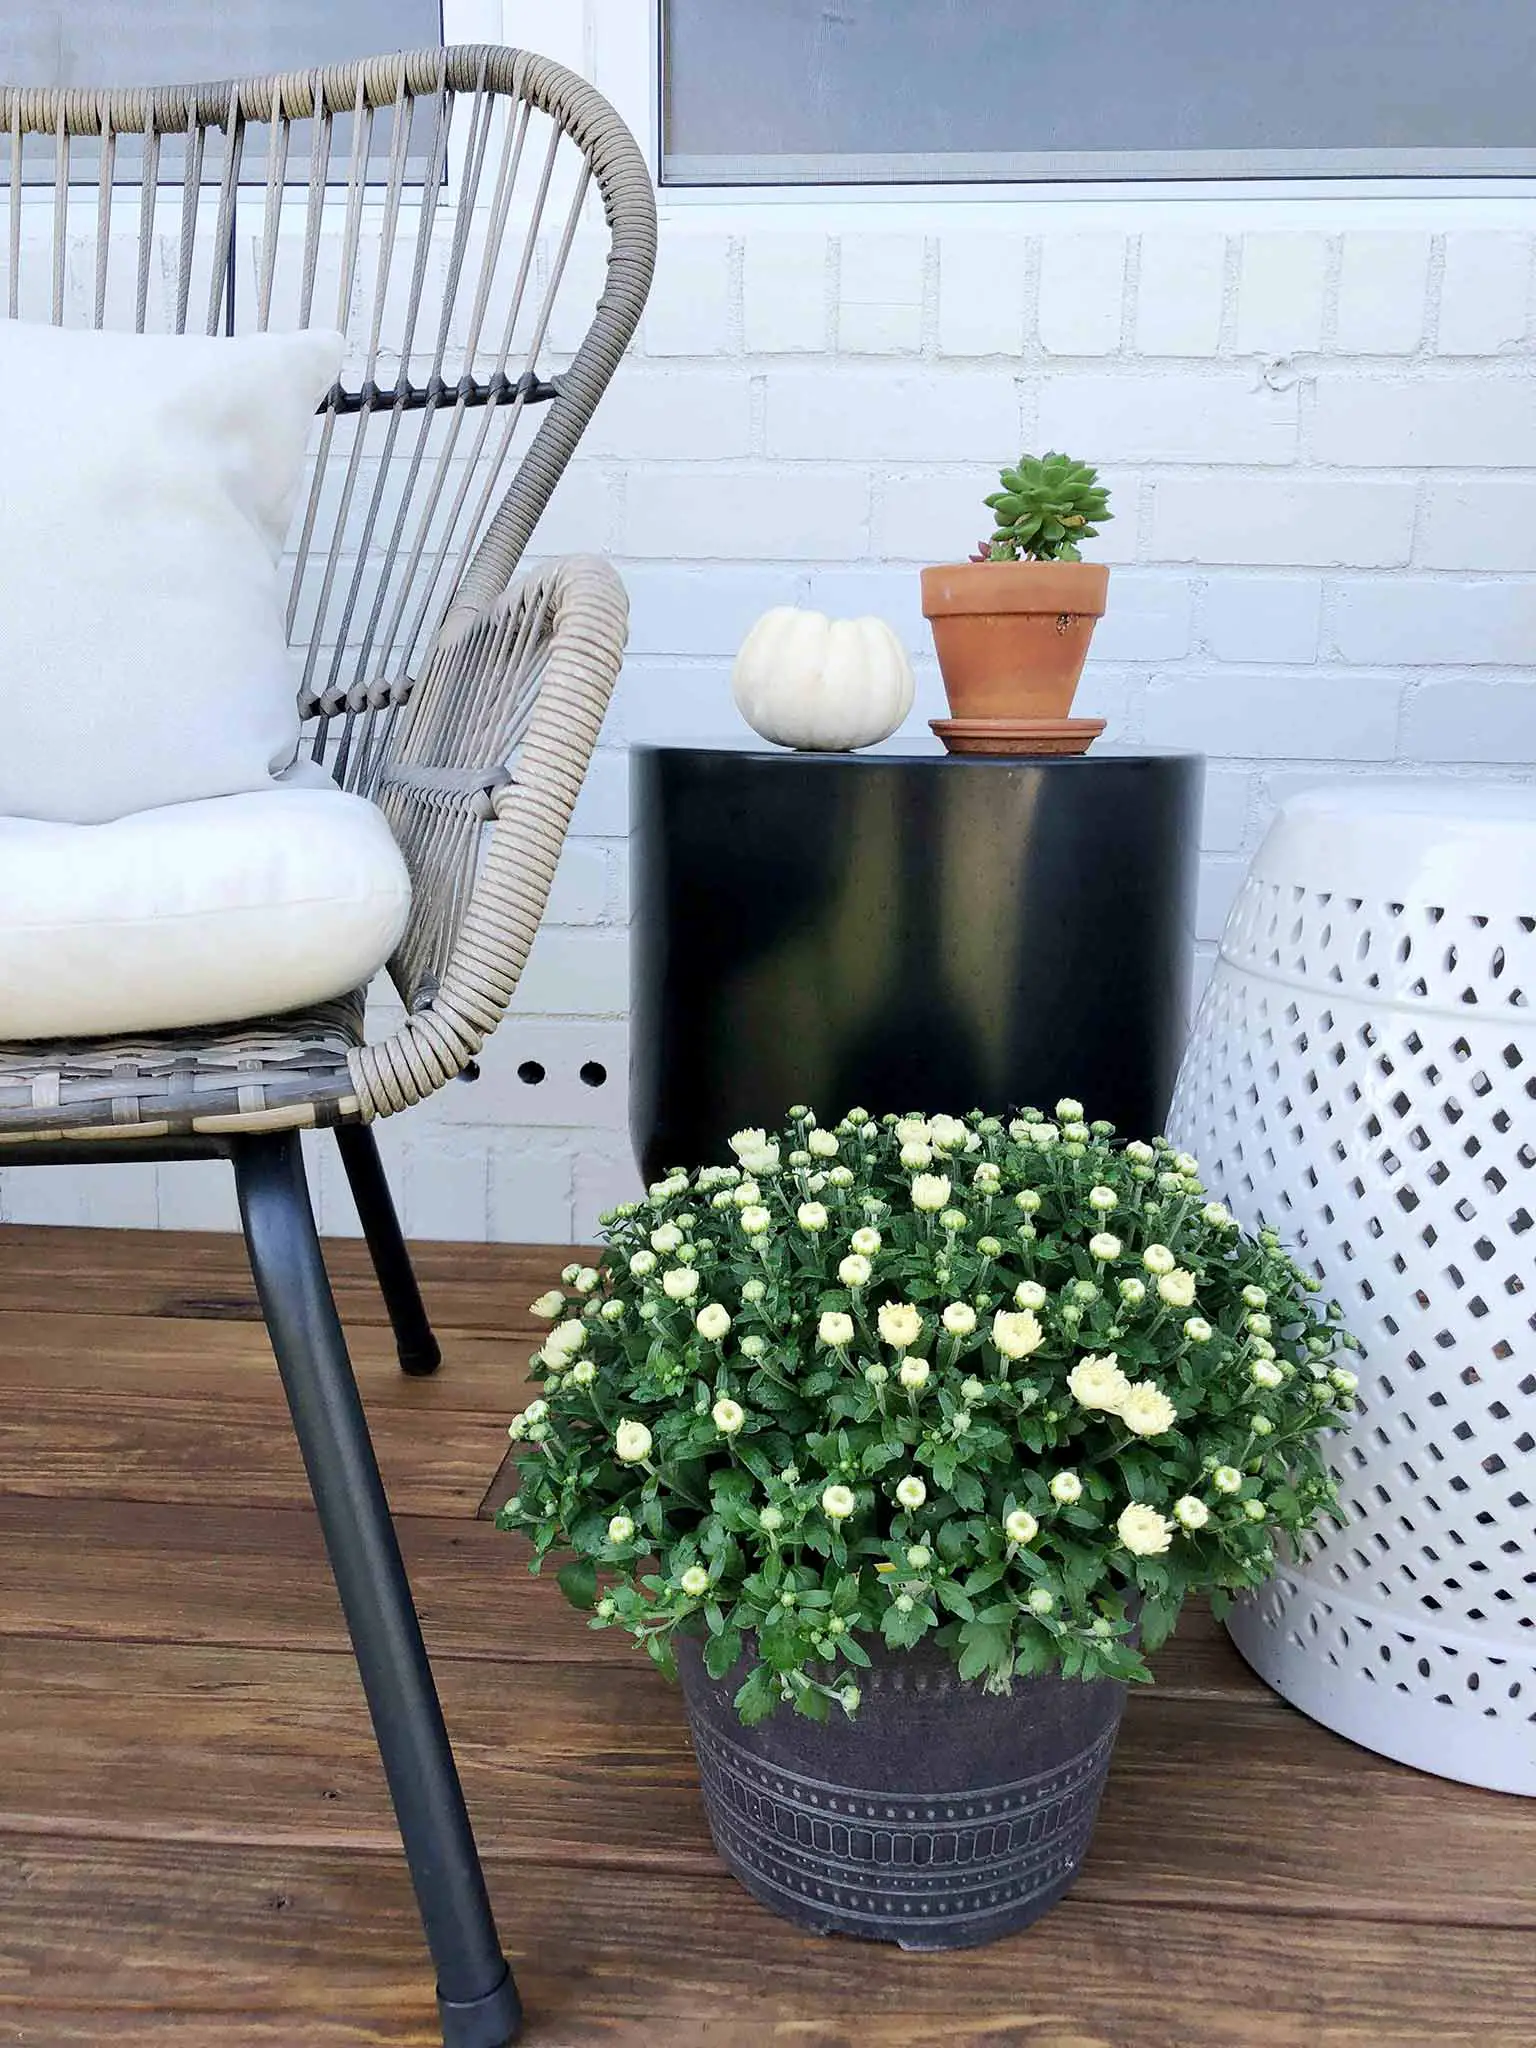 White mums - Front porch fall makeover reveal - That Homebird Life Blog